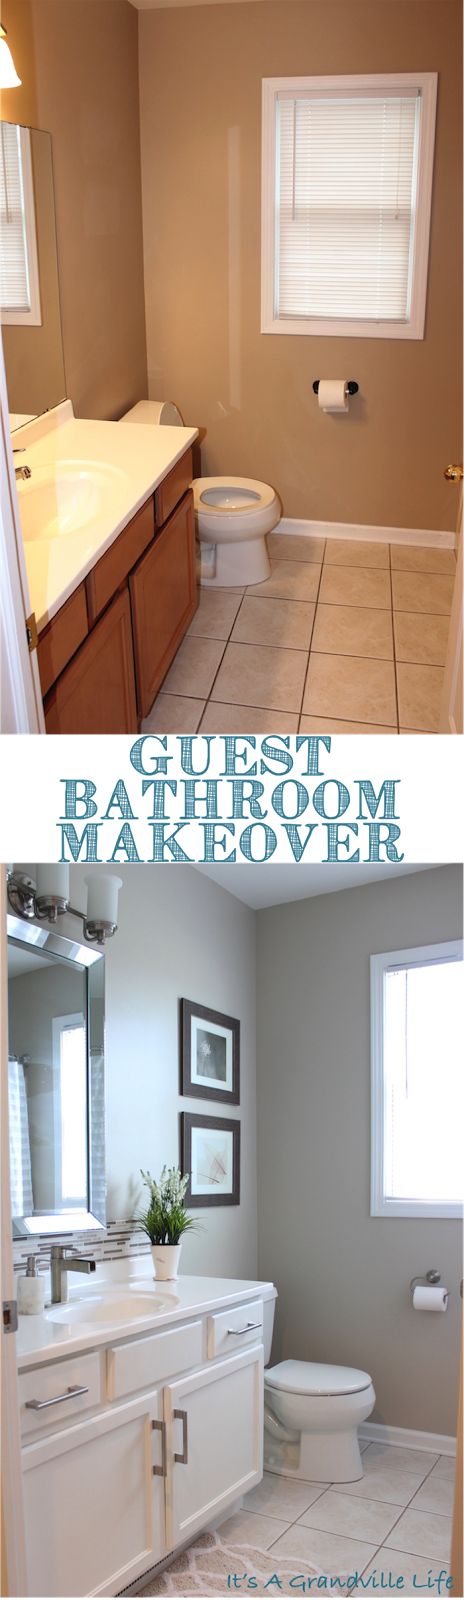 Easily transform your bathroom with some paint and new hardware! See the transformation and DIY projects yourself!. It's A Grandville Life : Guest Bathroom Reveal